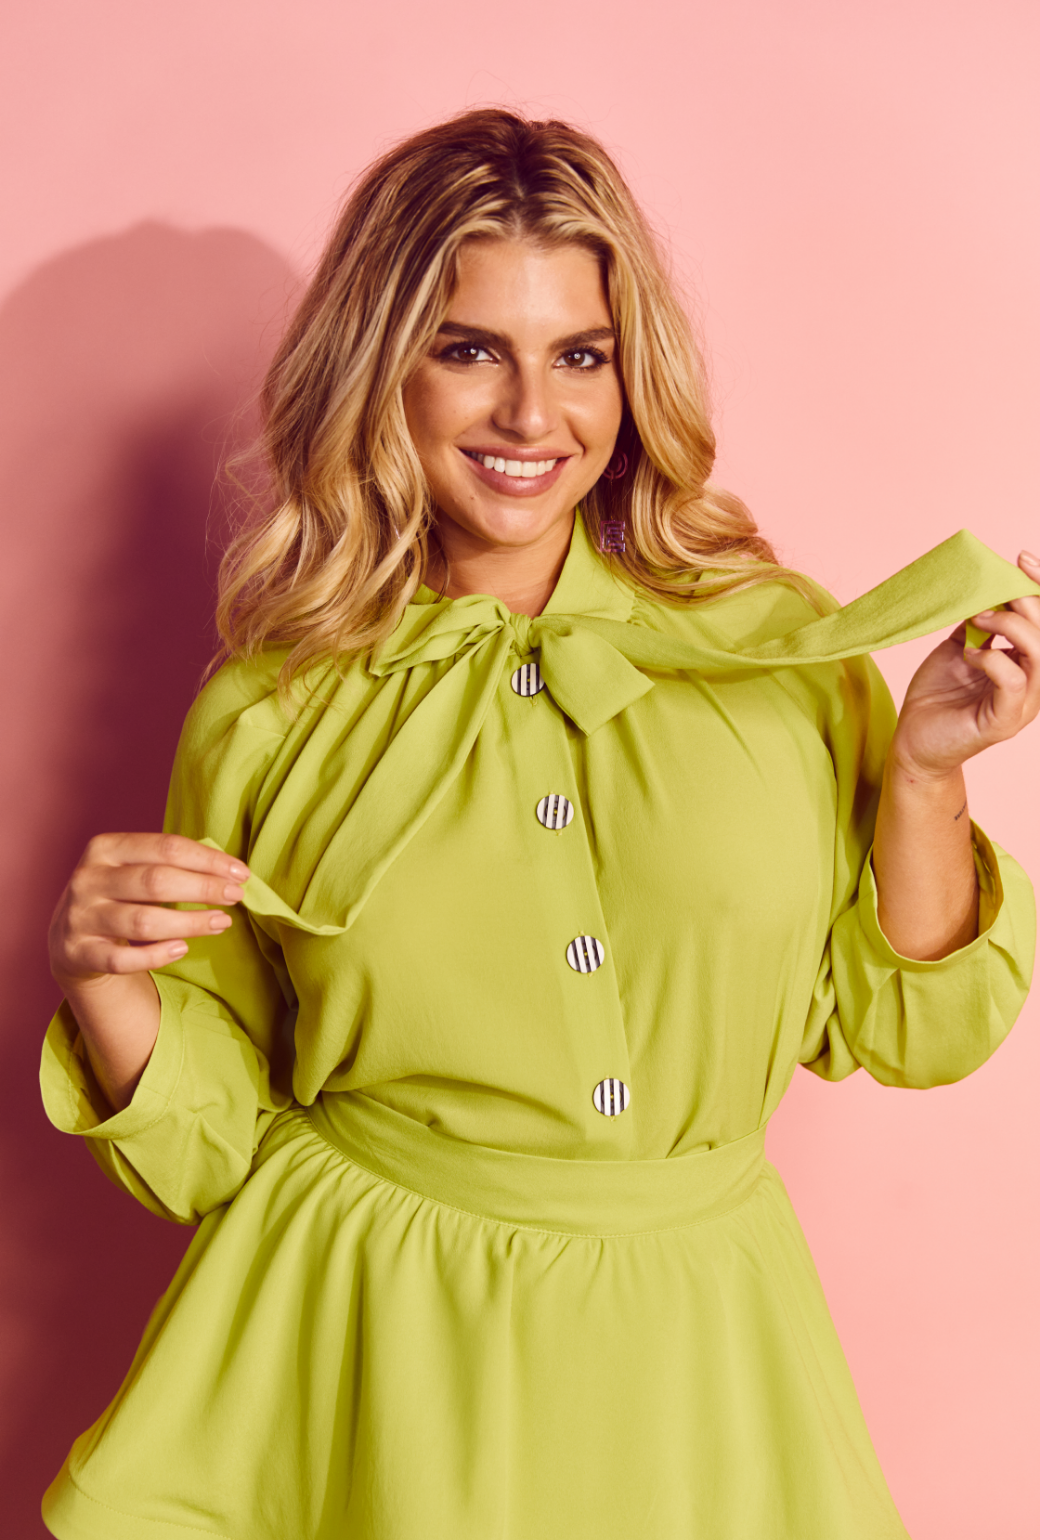 Big 10 Bow Blouse - Chartreuse 2.0